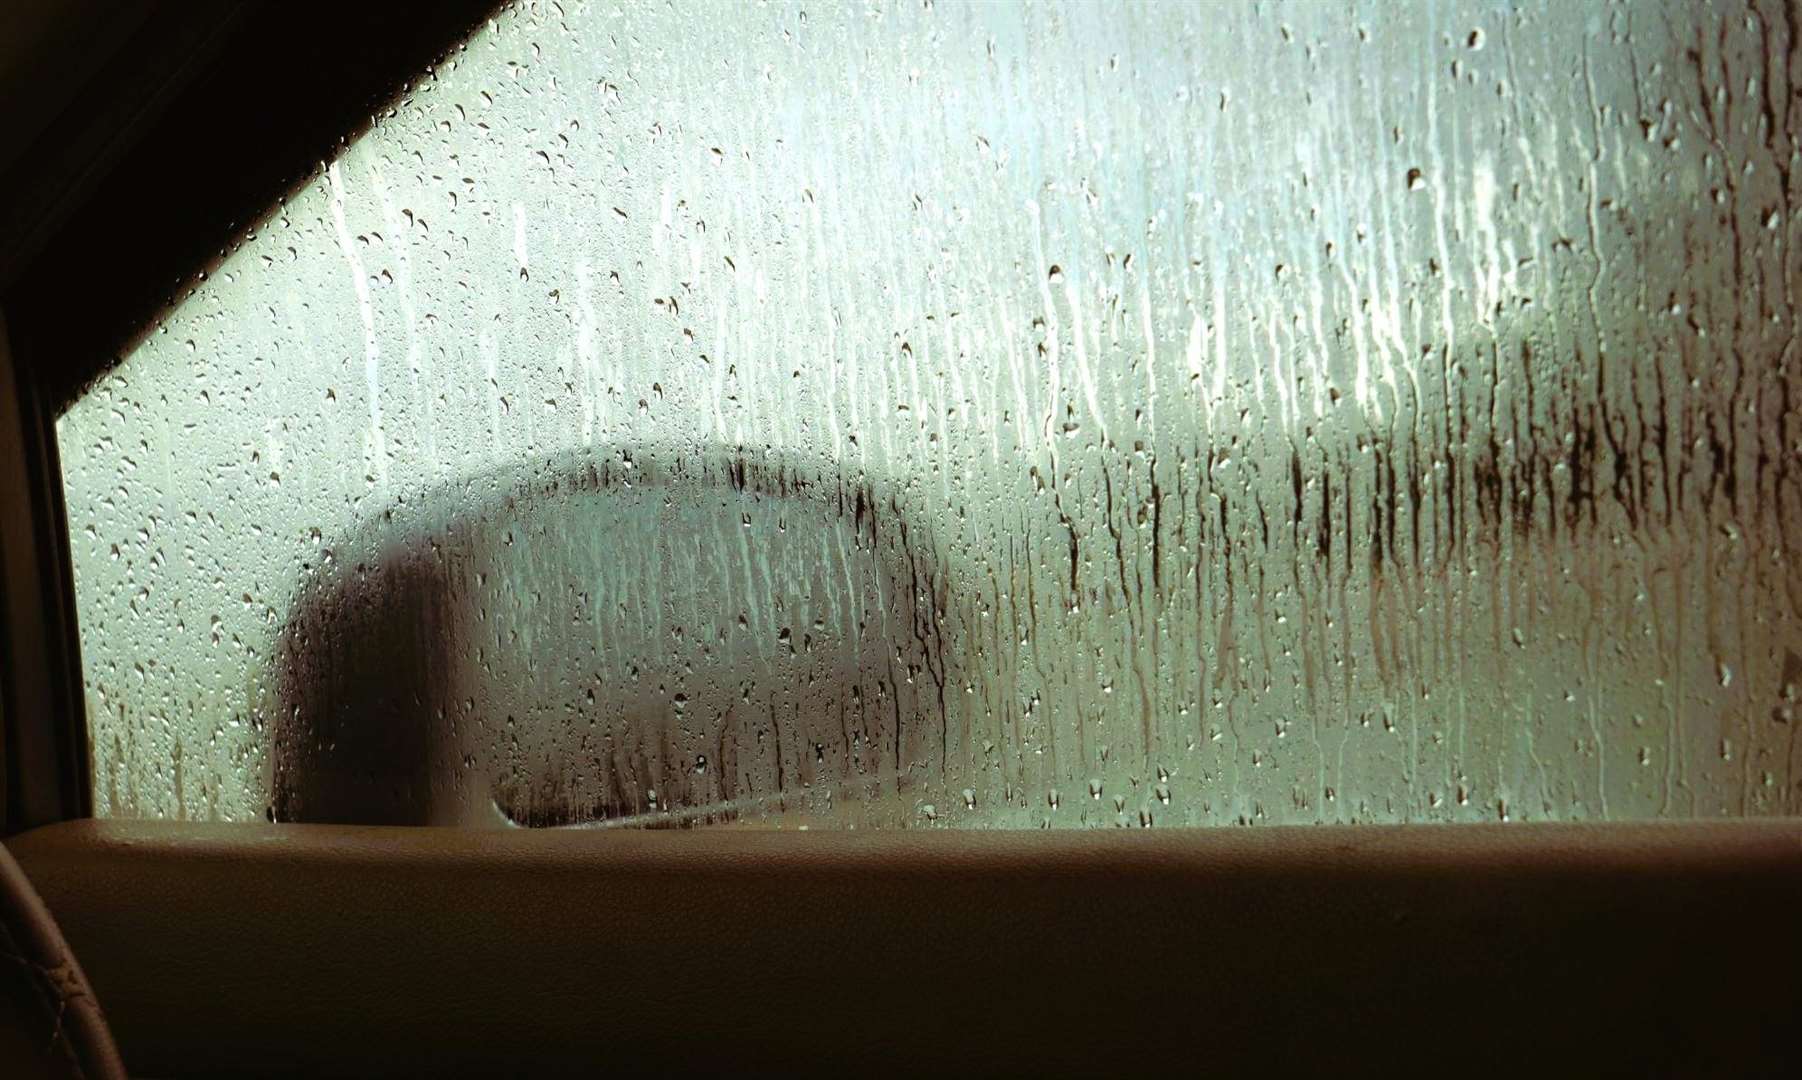 A misted up window can cause major issues when driving. Picture supplied